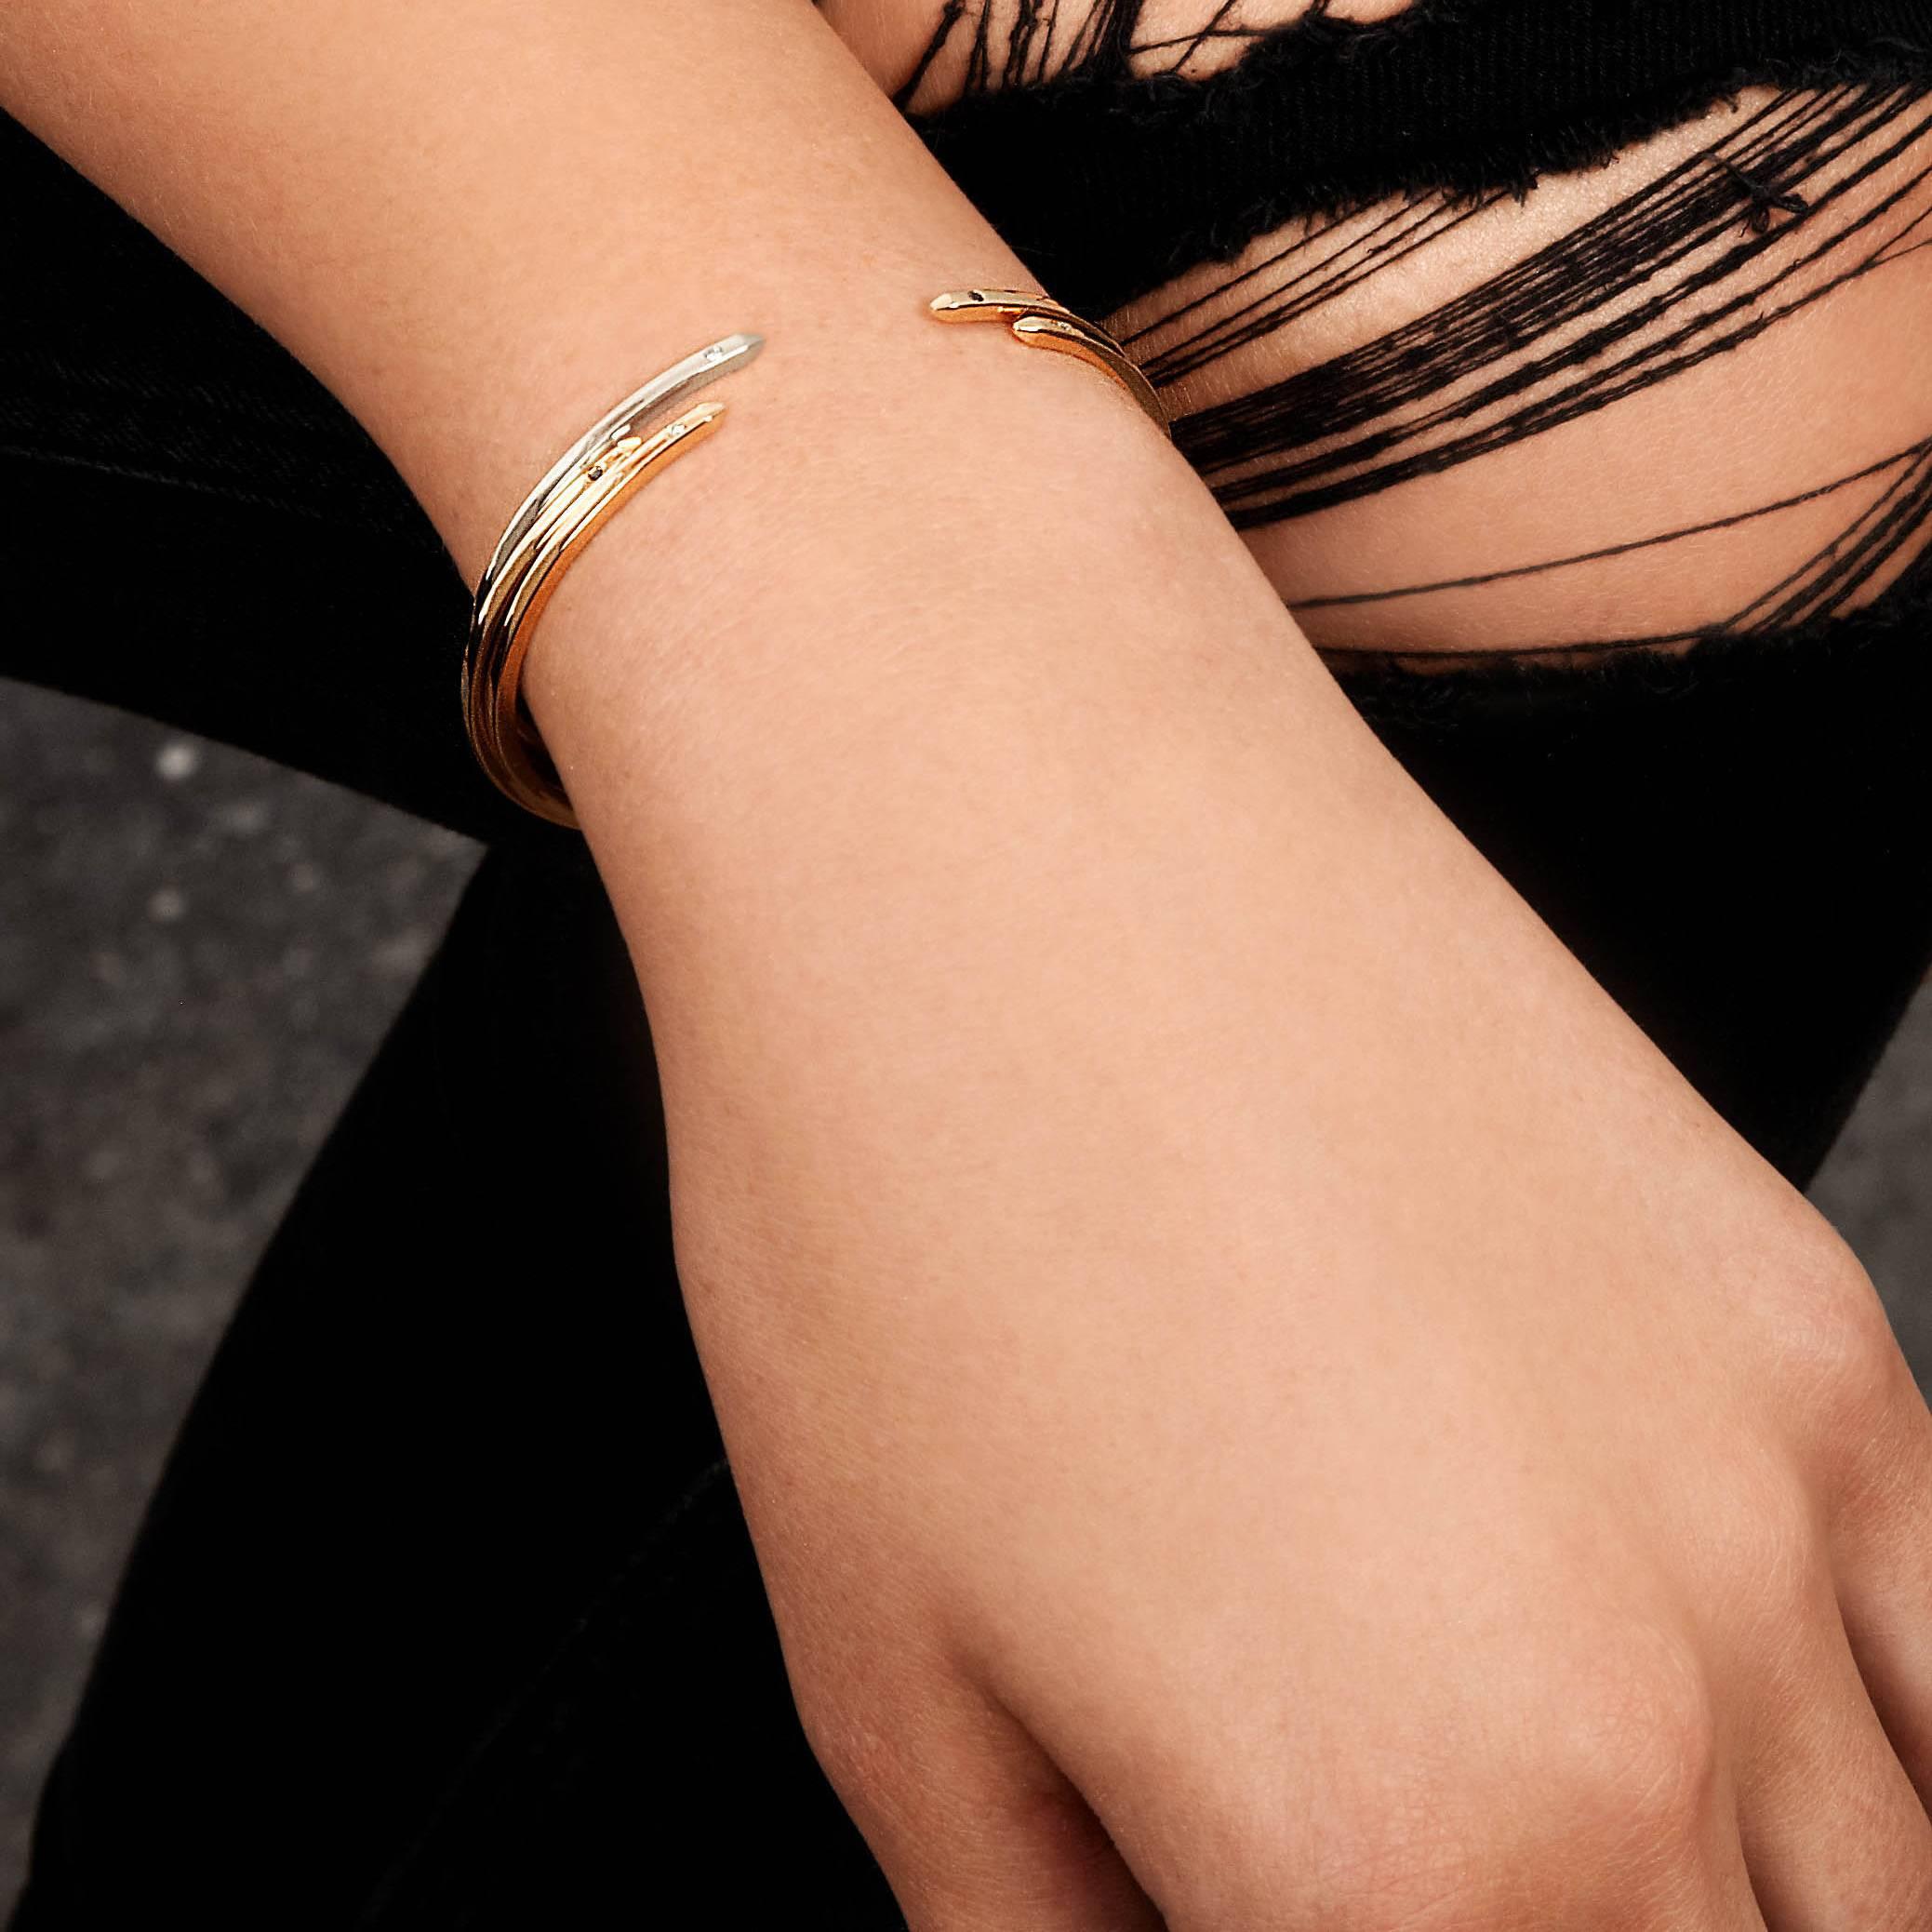 An elevated take on a jewellery basic, our 2mm-square cuff in 9-carat yellow gold has square beveled edges and two black diamonds.  Total diamond carat weight .016 carats.  The bracelet is slightly flexible to enable a customised fit for the